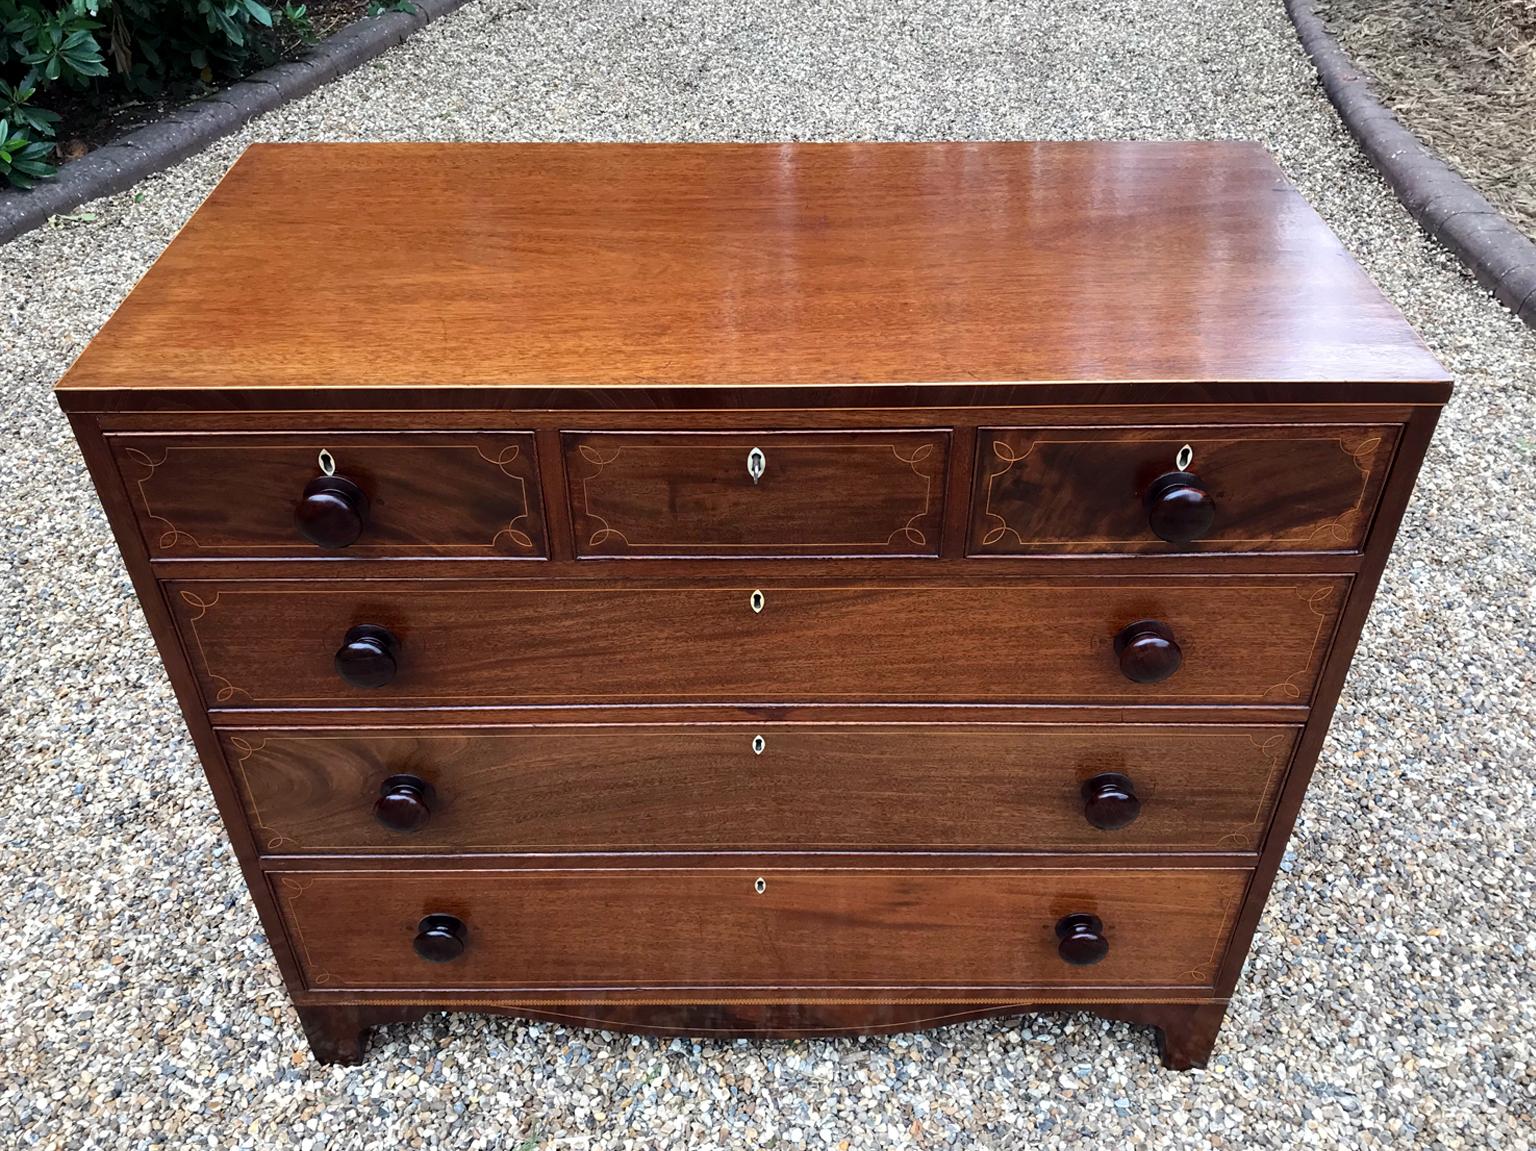 Hand-Crafted 19th Century Regency Mahogany Inlaid Chest of Drawers For Sale